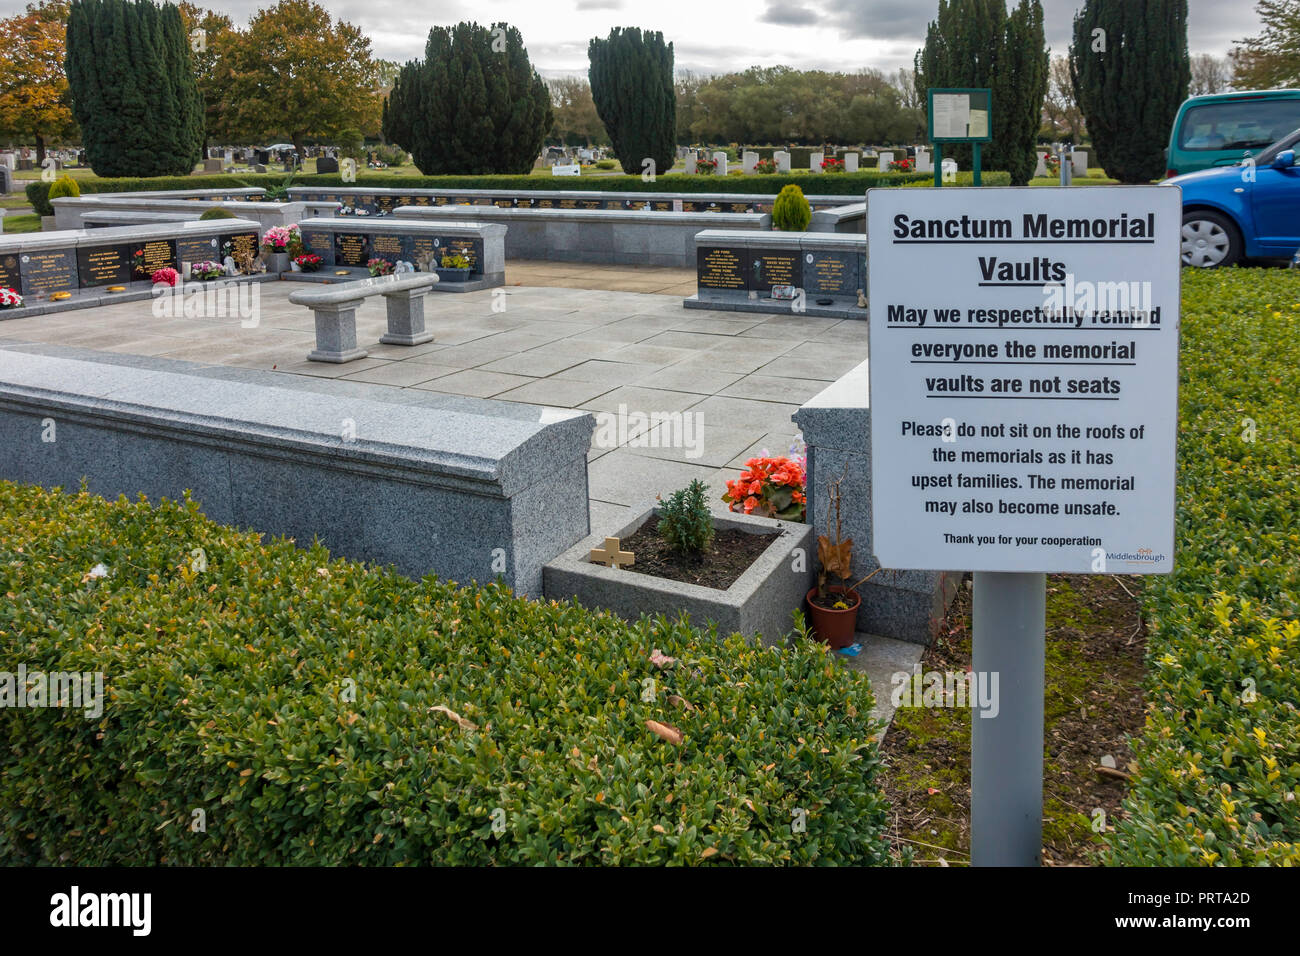 Sanctum Memorial Vaults in the garden of Remembrance in Acklam cemetery Middlesborough with a notice requesting people not to sit on them Stock Photo